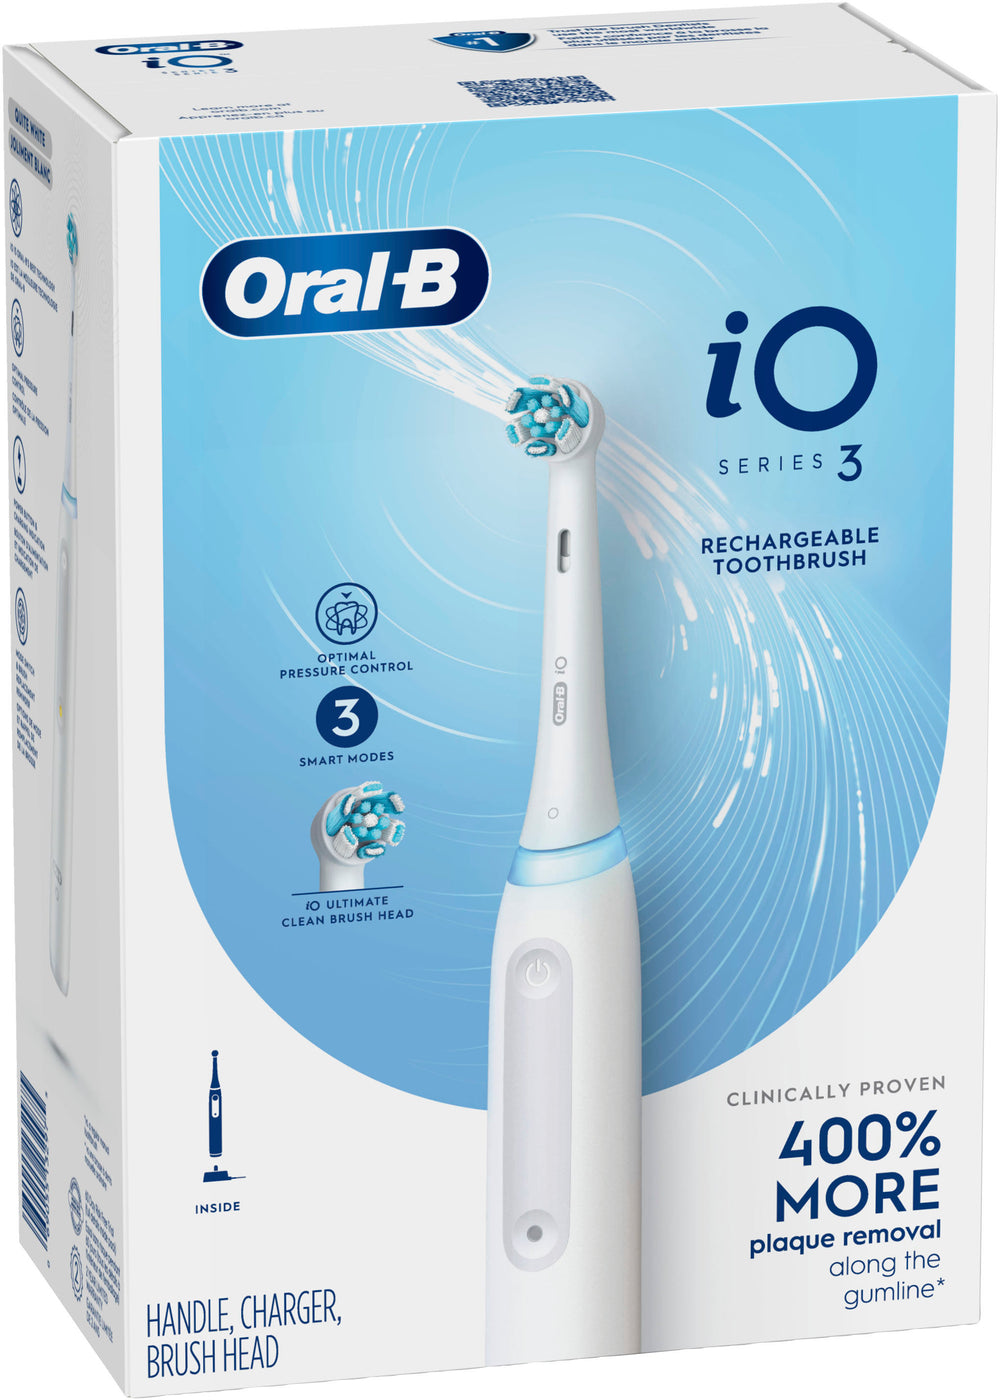 Oral-B - iO Series 3 Electric Toothbrush with (1) Brush Head, Rechargeable, White - White_1